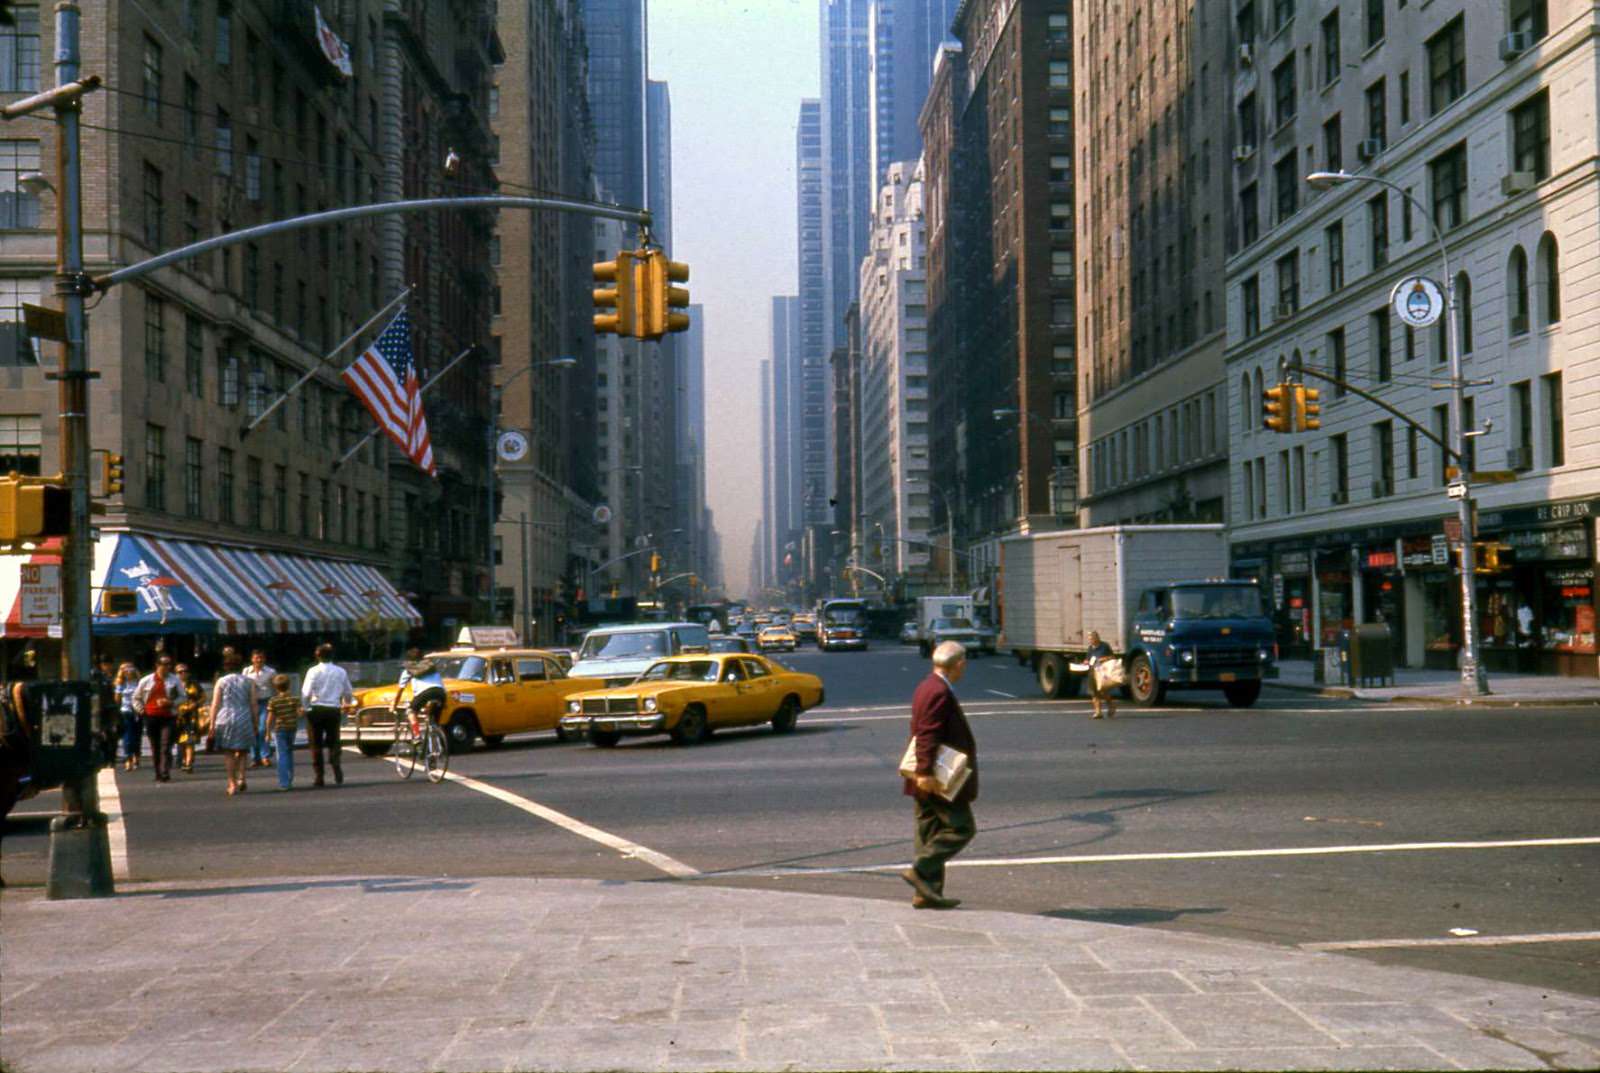 Sixth Avenue facing South from 59th Street